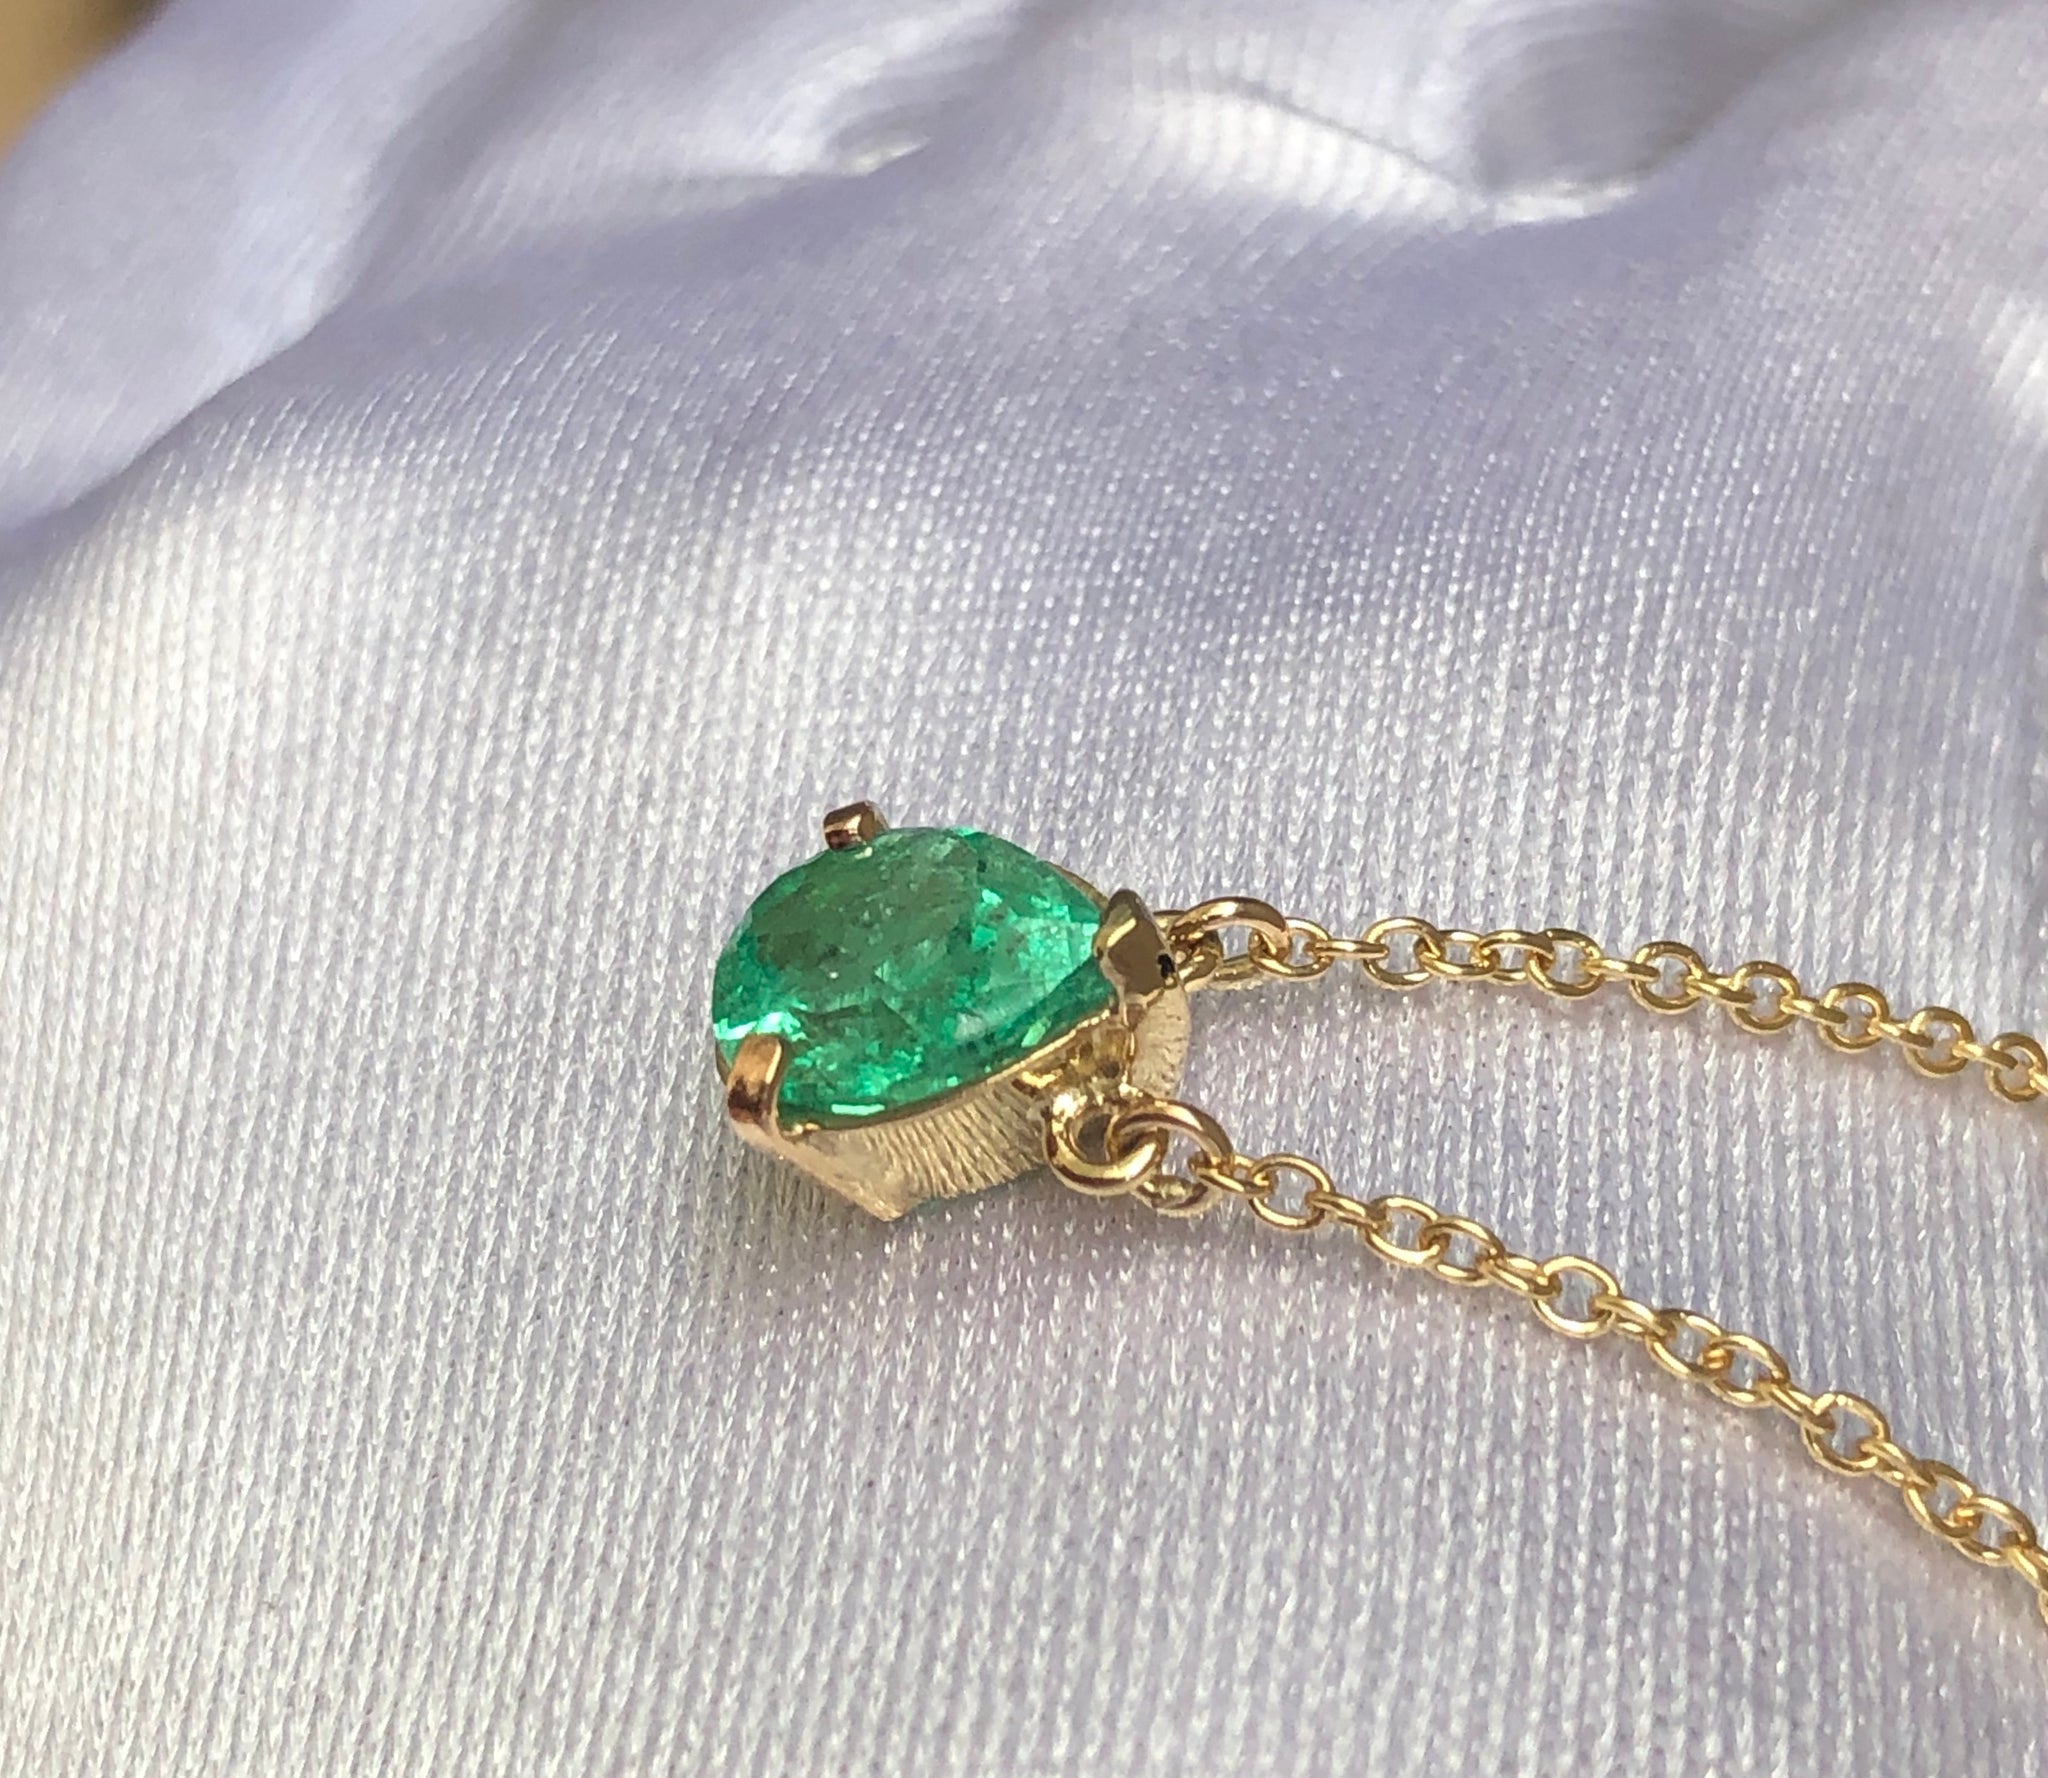 2.25 Carat Colombian Emerald Solitaire Pendant Necklace Yellow Gold 18K